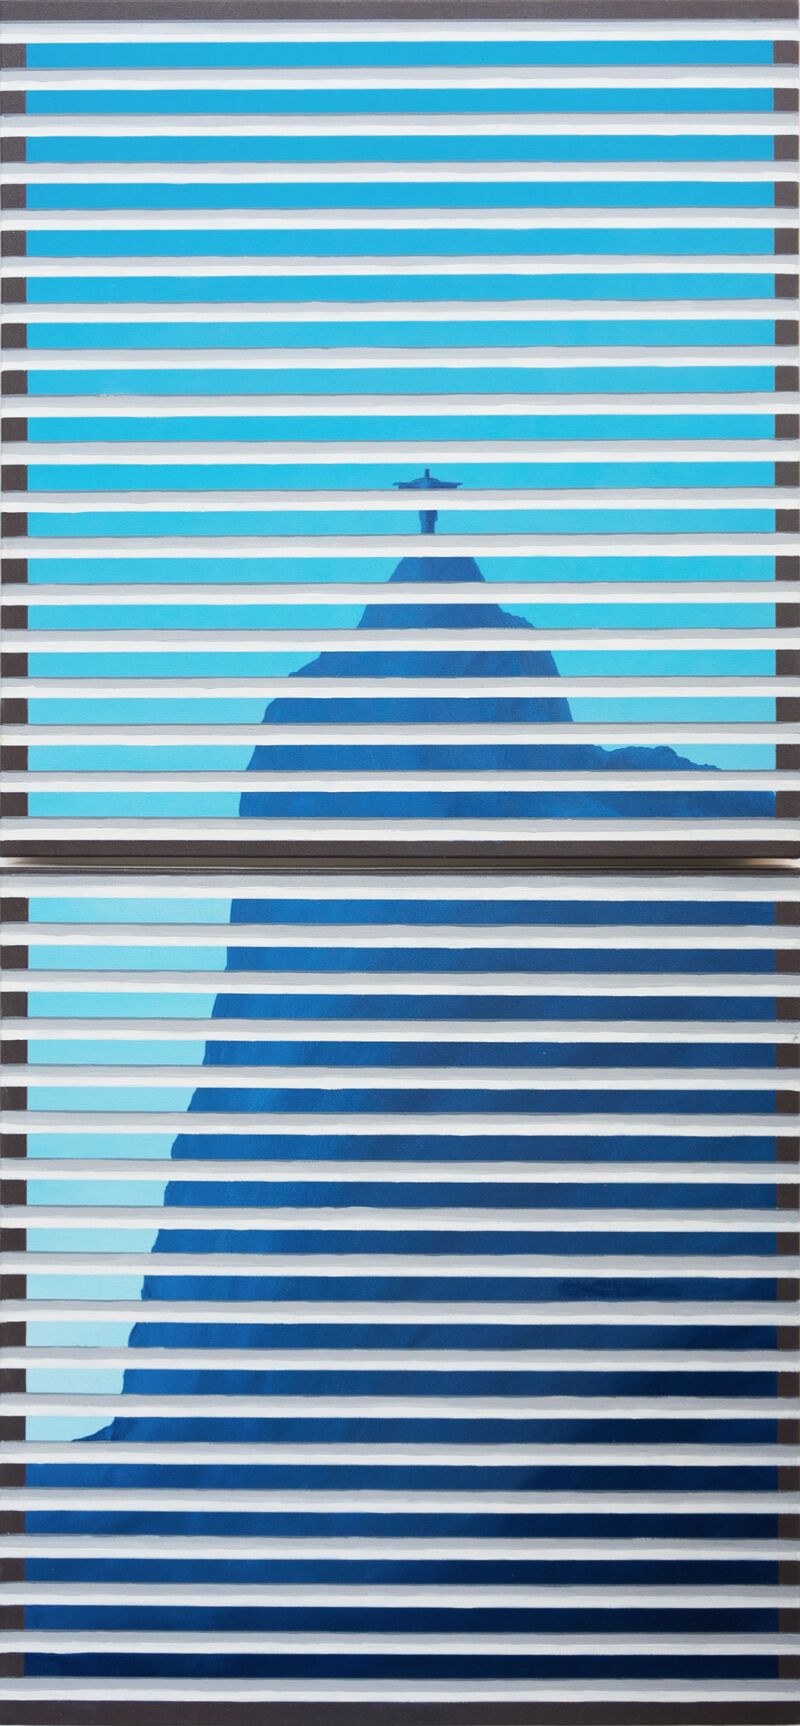 Corcovado (diptych)  - a Paint by Claudia Castro Barbosa